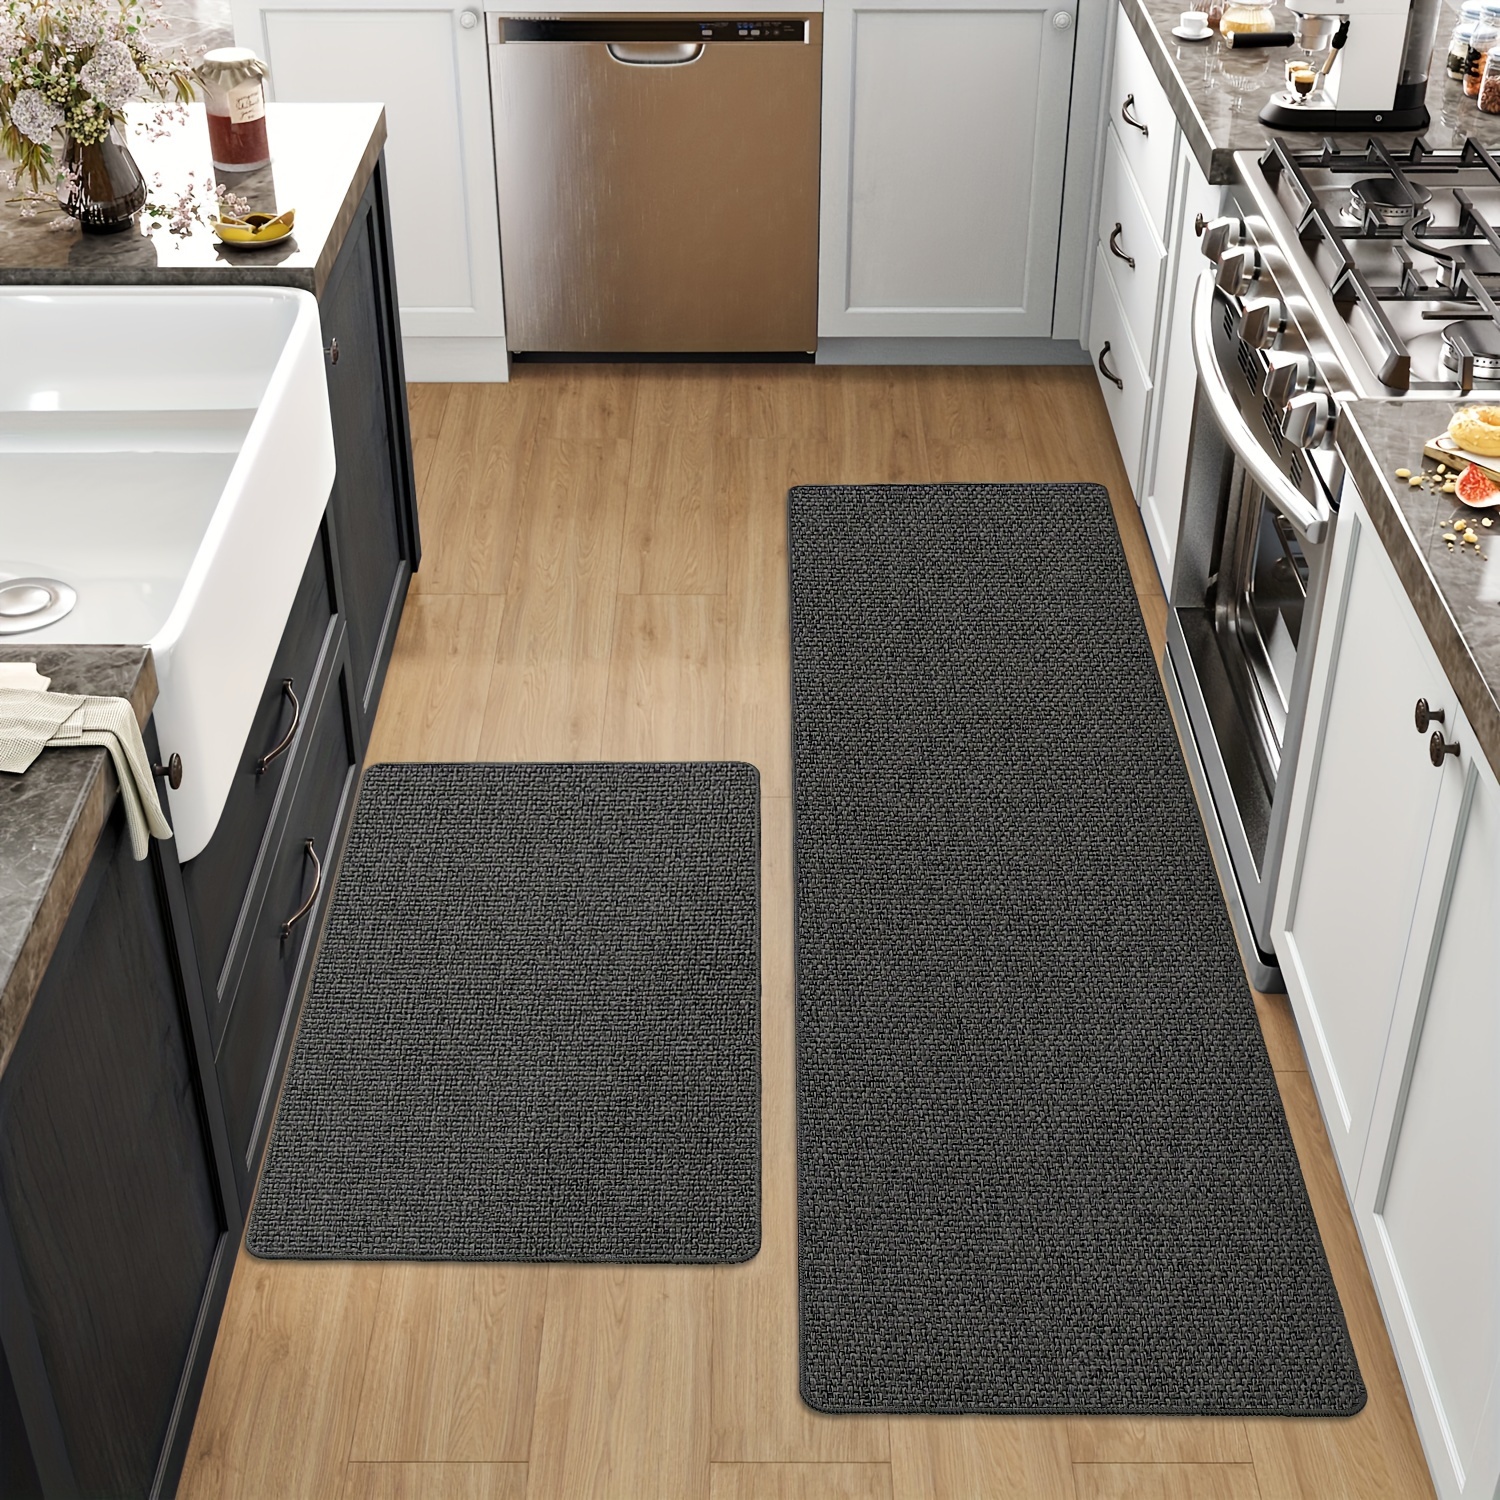 

2 Pc Kitchen Rugs And Mats, Thin Non Skid Washable Kitchen Runner Rugs Set Of 2, Absorbent Kitchen Mats For Floor, Comfort Standing Mat For In Front Of Sink, Laundry Room, 17"x29"+17"x59", Dark Grey